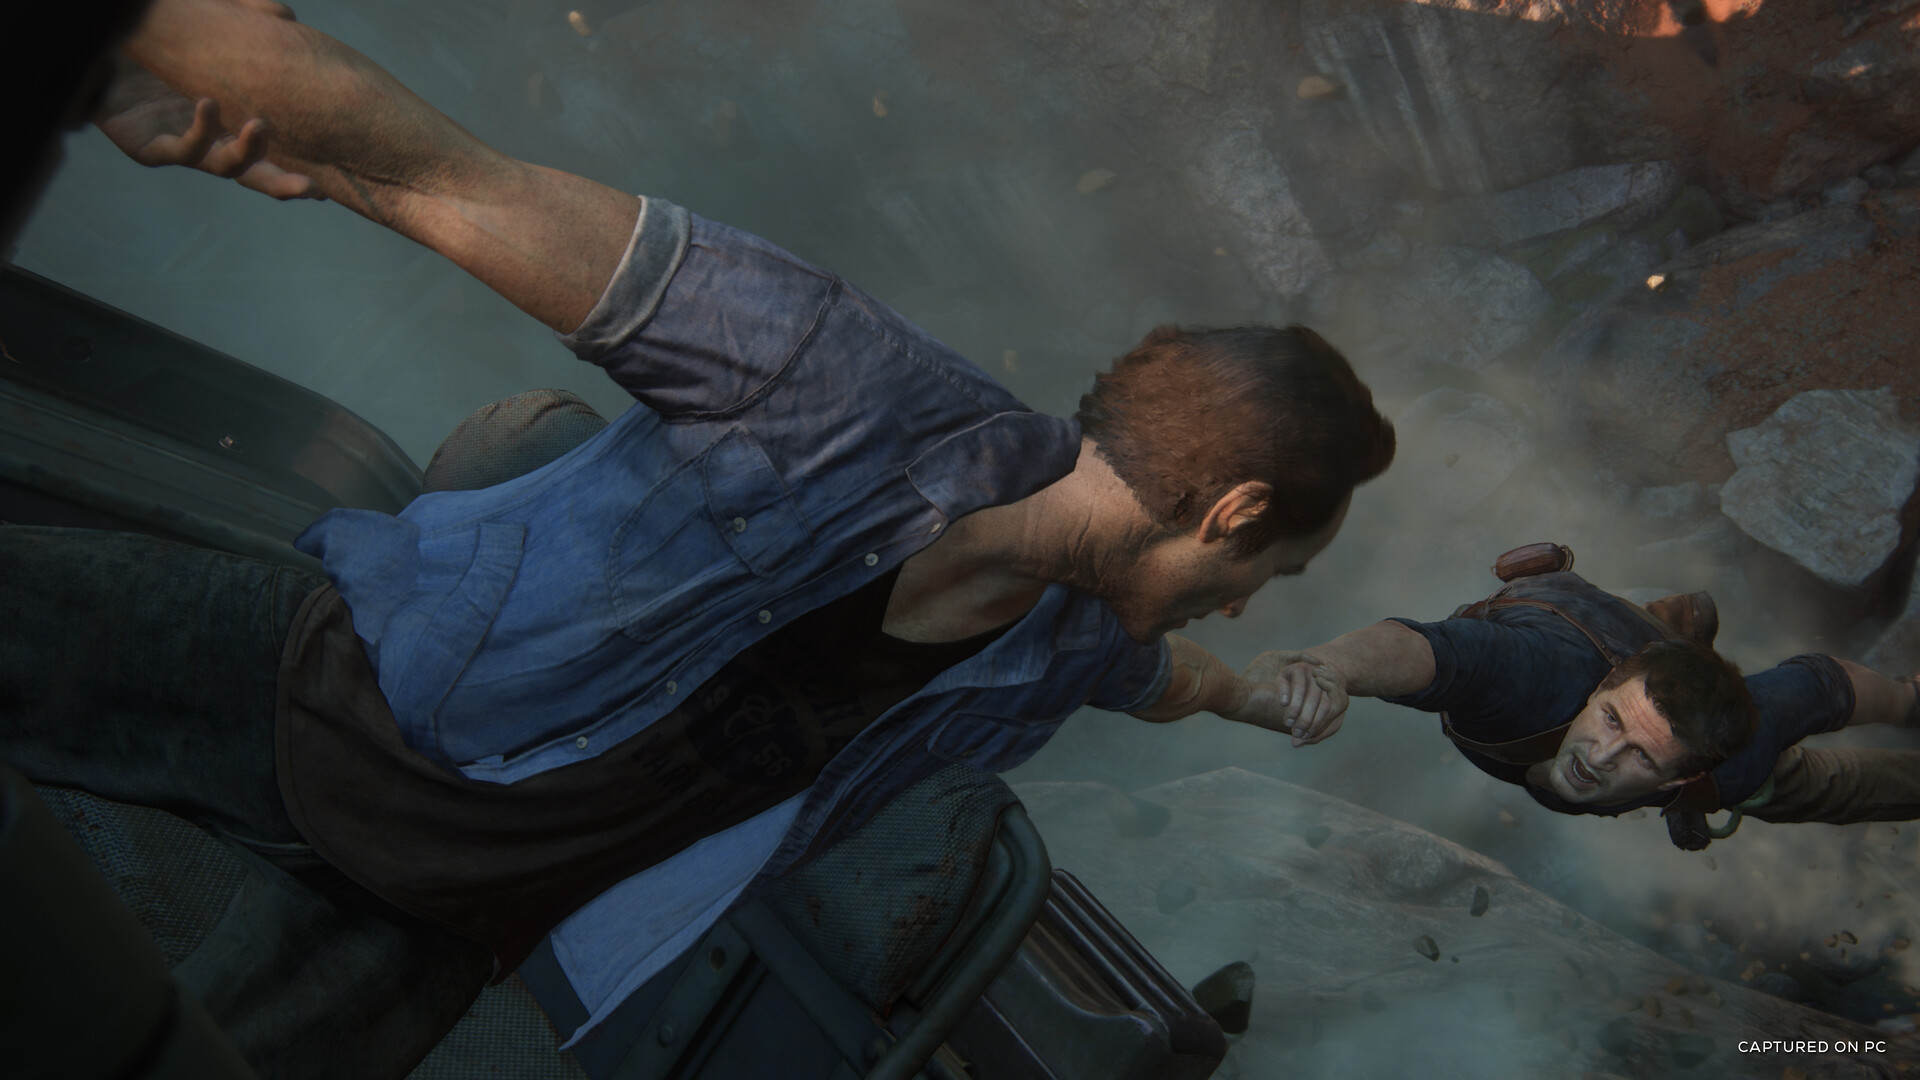 Here's your Steam page for the Uncharted: Legacy of Thieves Collection